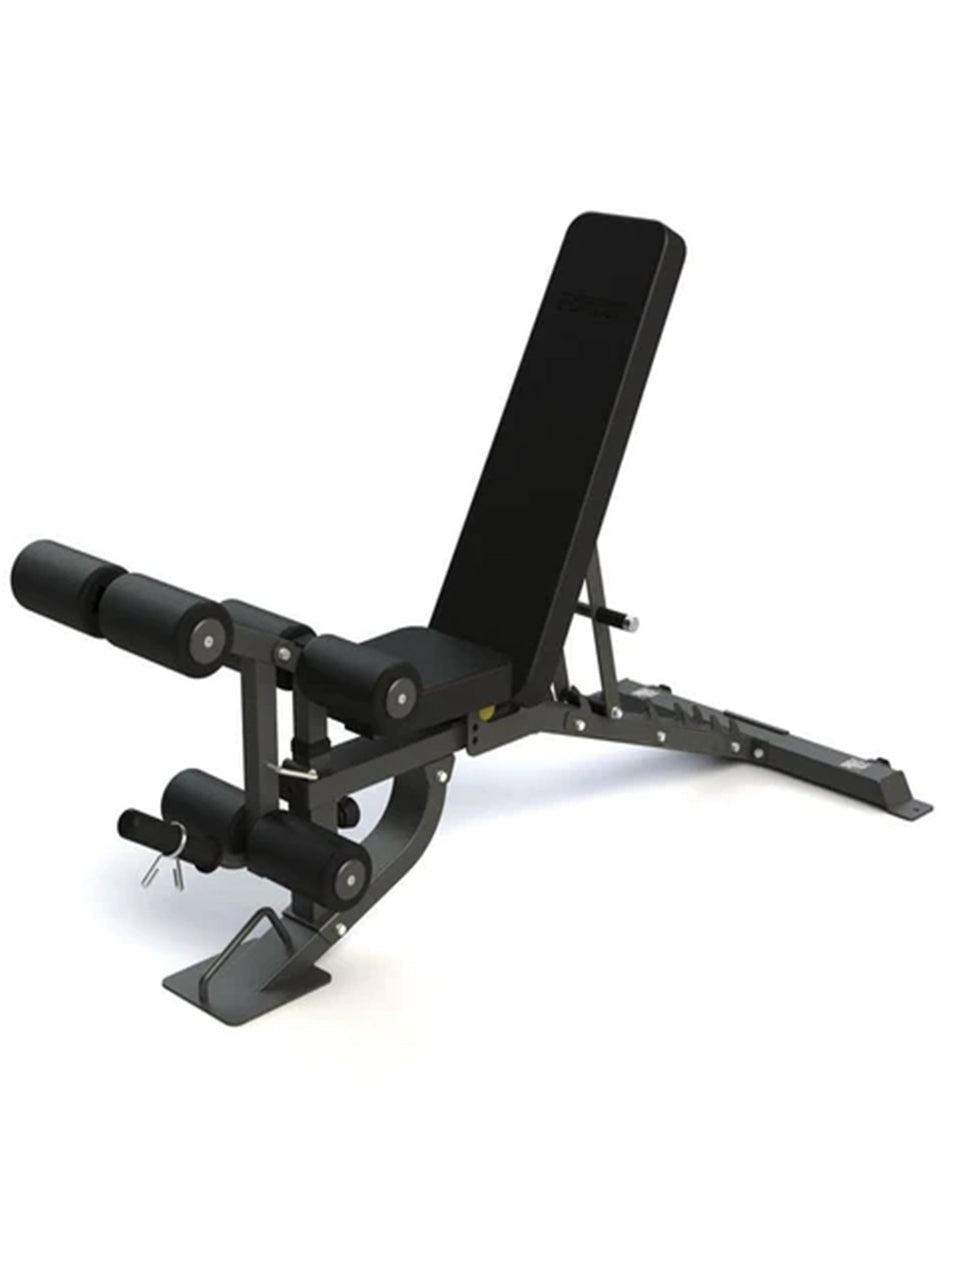 1441 Fitness FID Bench with Arm and Leg Attachment - A8009